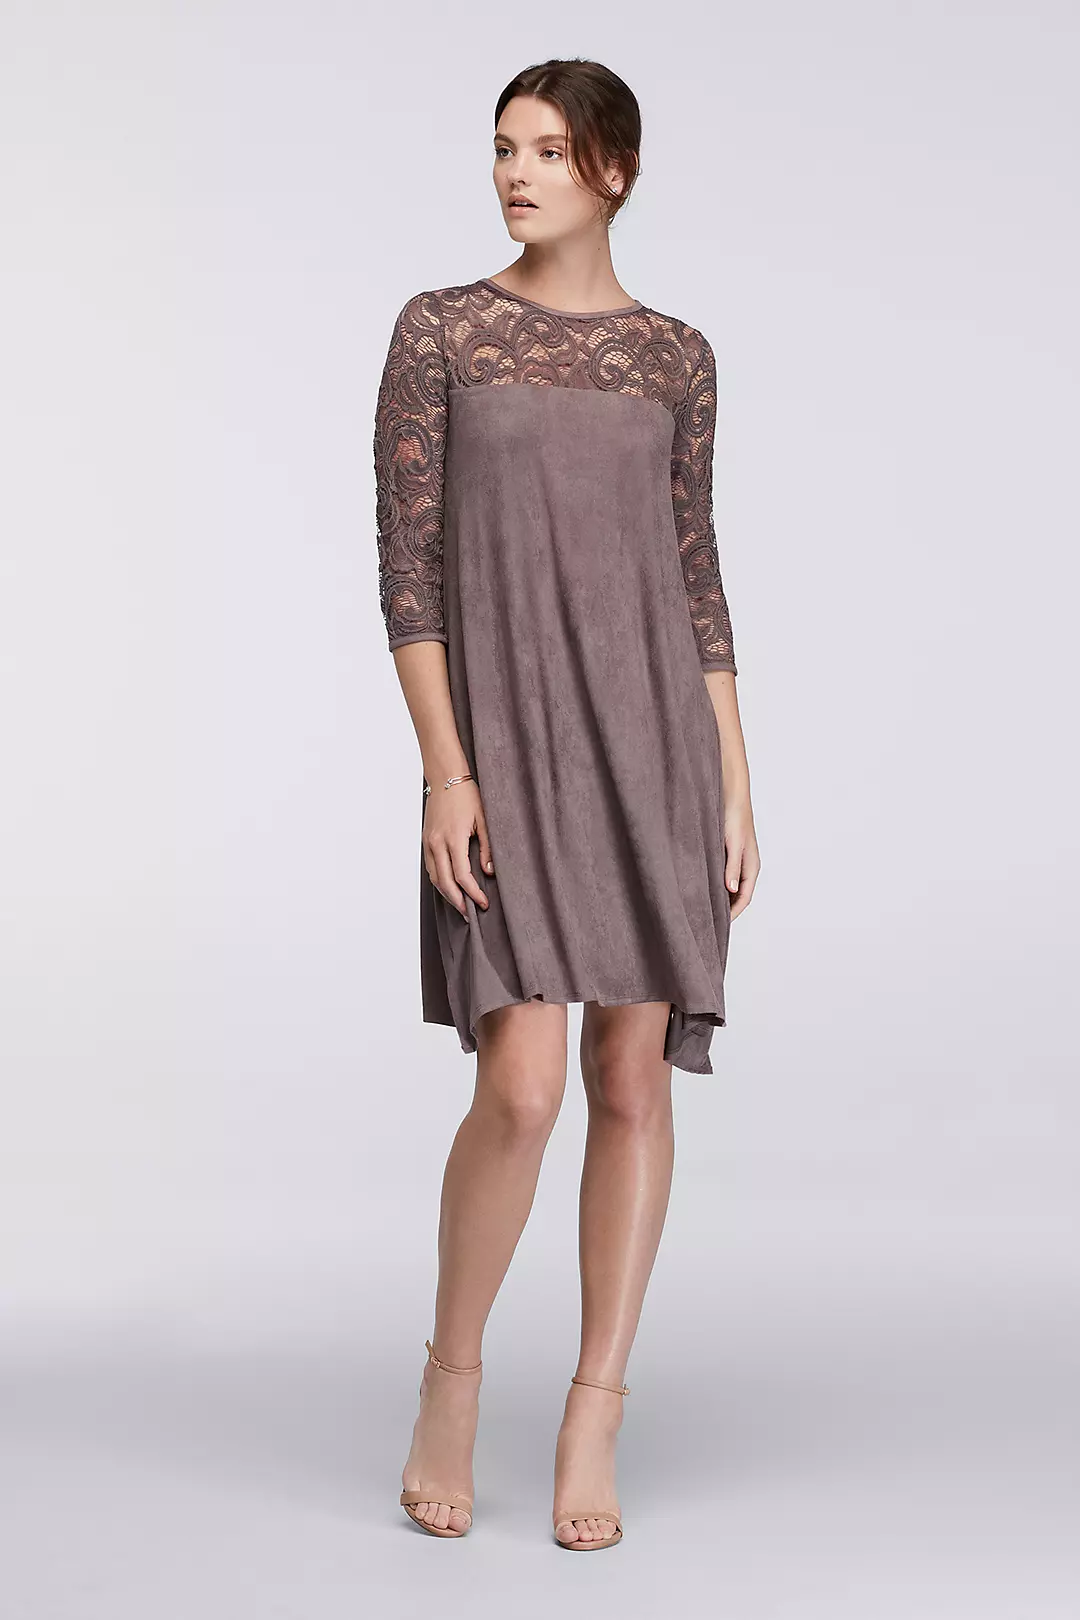 Lace and Faux-Suede Swing Dress Image